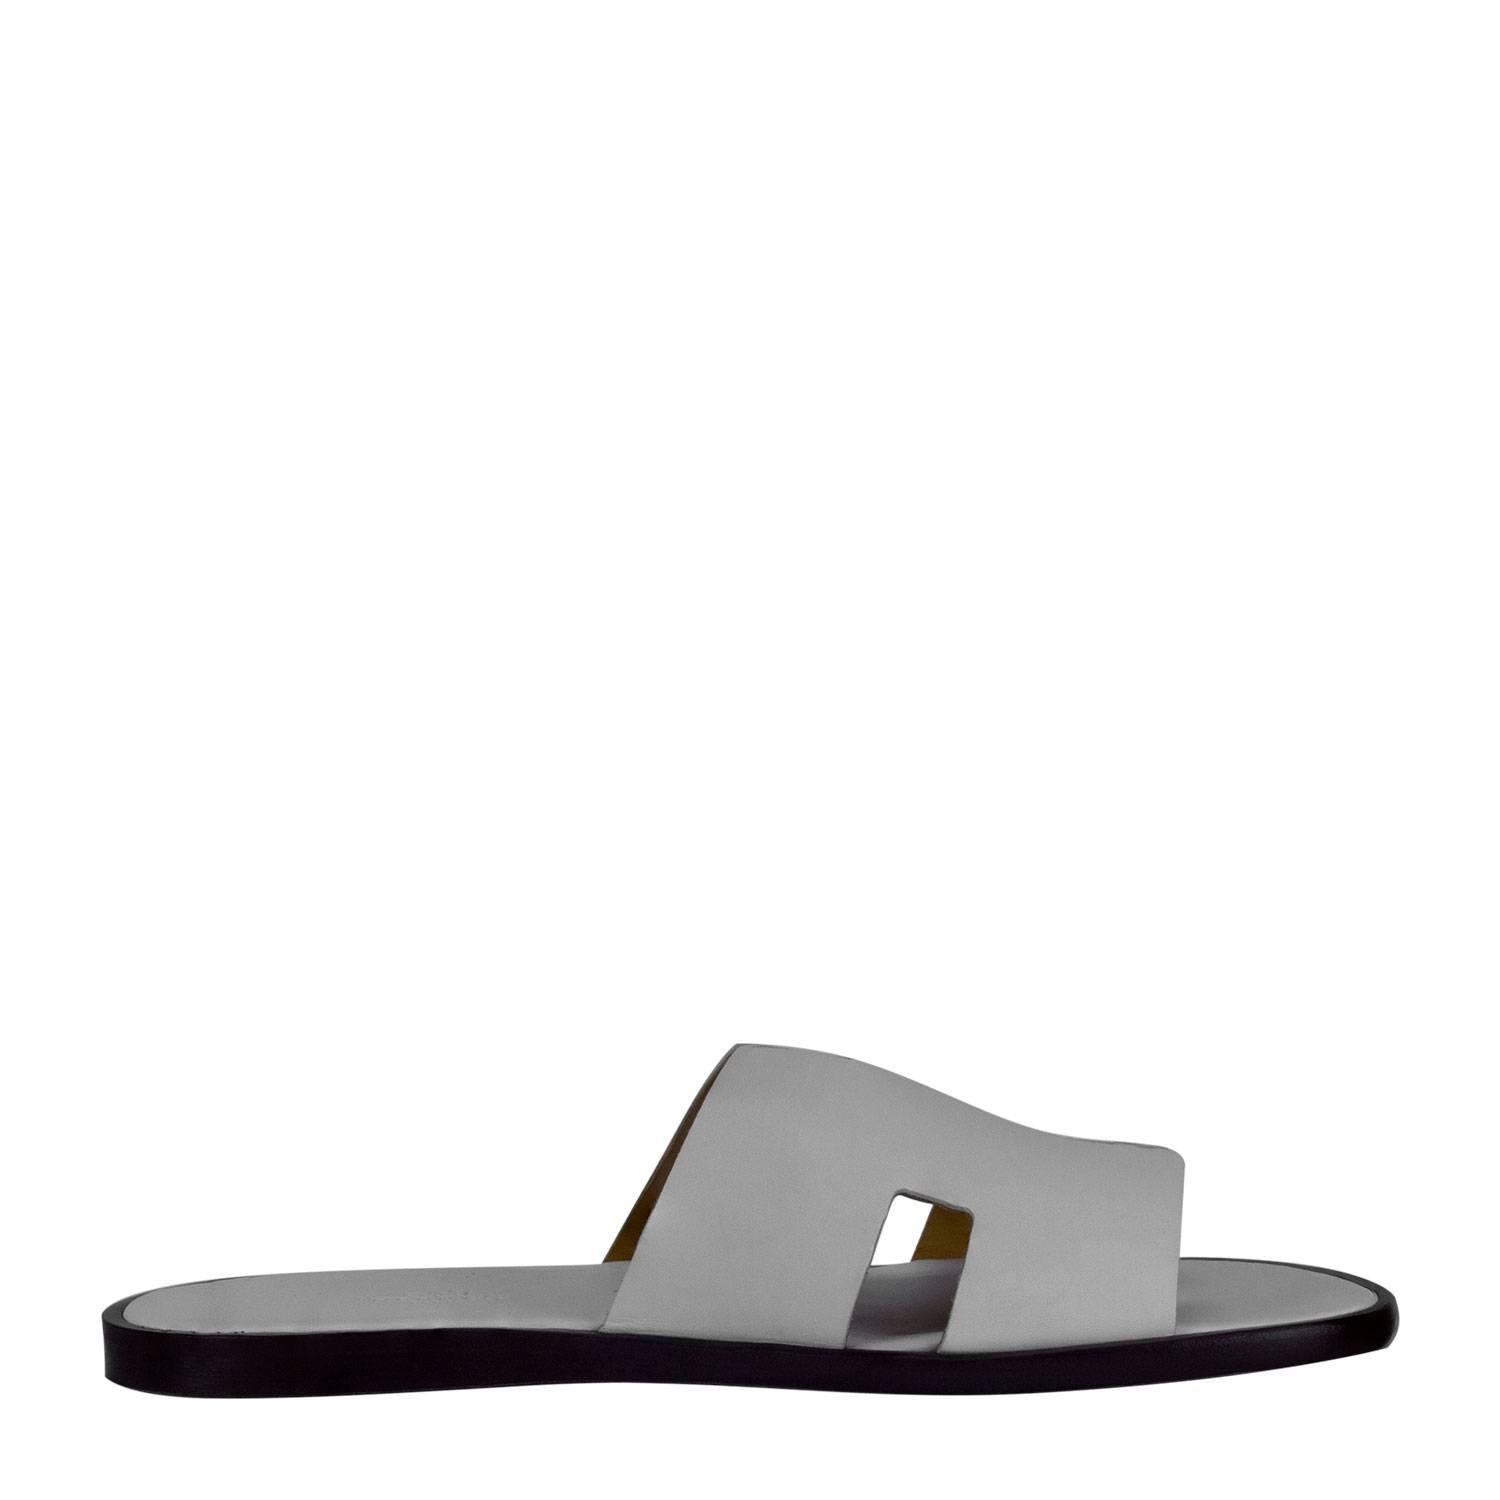 Hermes Men Sandals Izmir Veau Leather White Color 43 Size 2016

Pristine condition. Pre-owned and never used.

Bought it in Hermes store in 2016.

The price of this item on Boutique Hermes is $710.00.

Composition: Leather.

Model: Izmir.

Size: 43